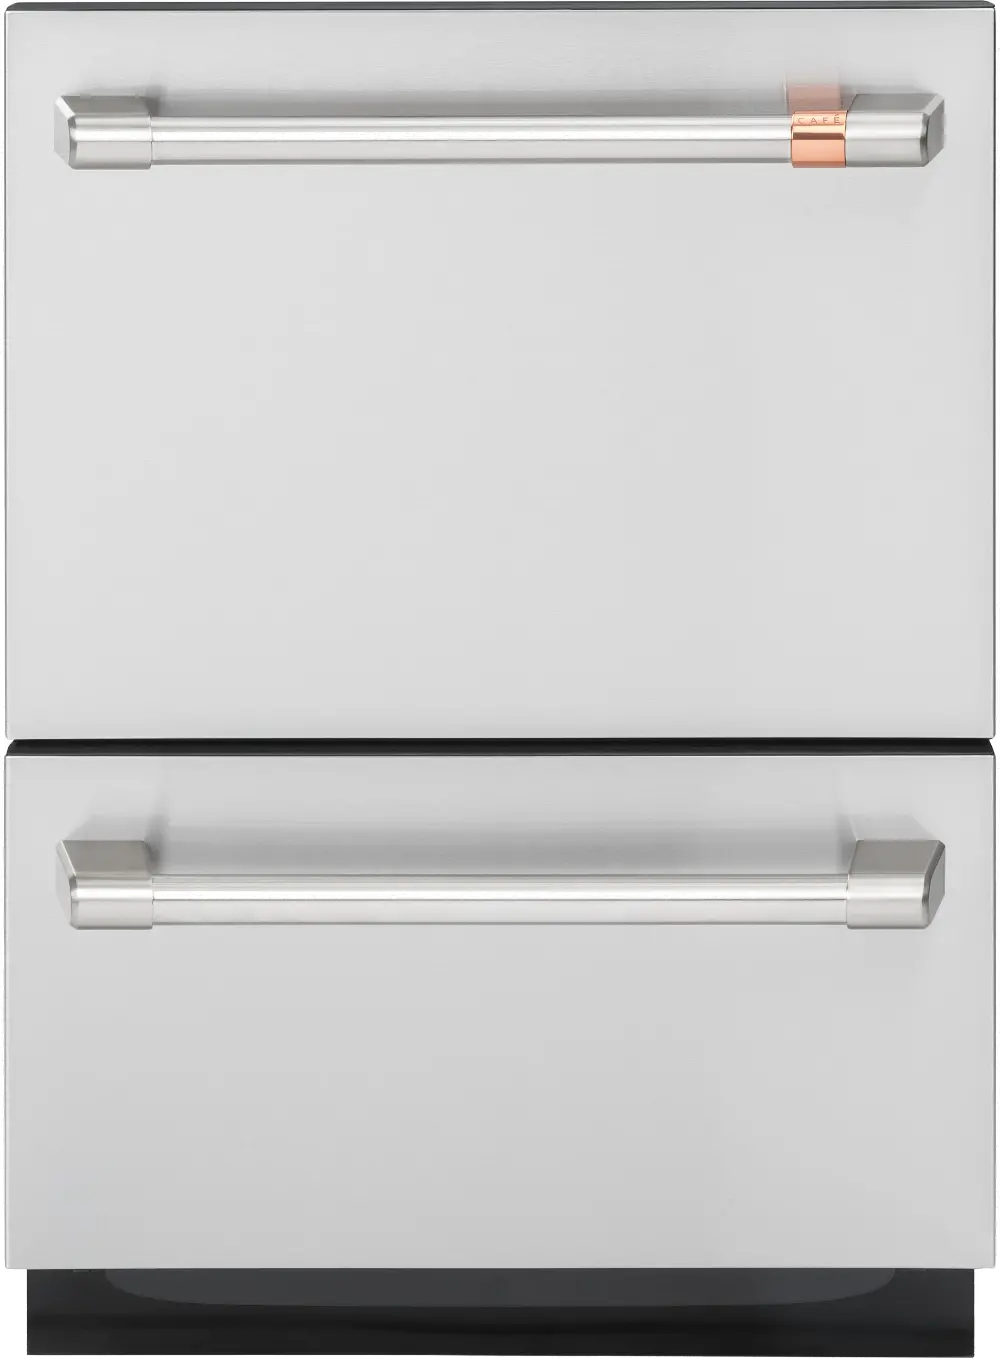 CDD420P2TS1 Cafe Double Drawer Dishwasher - Stainless Steel-1